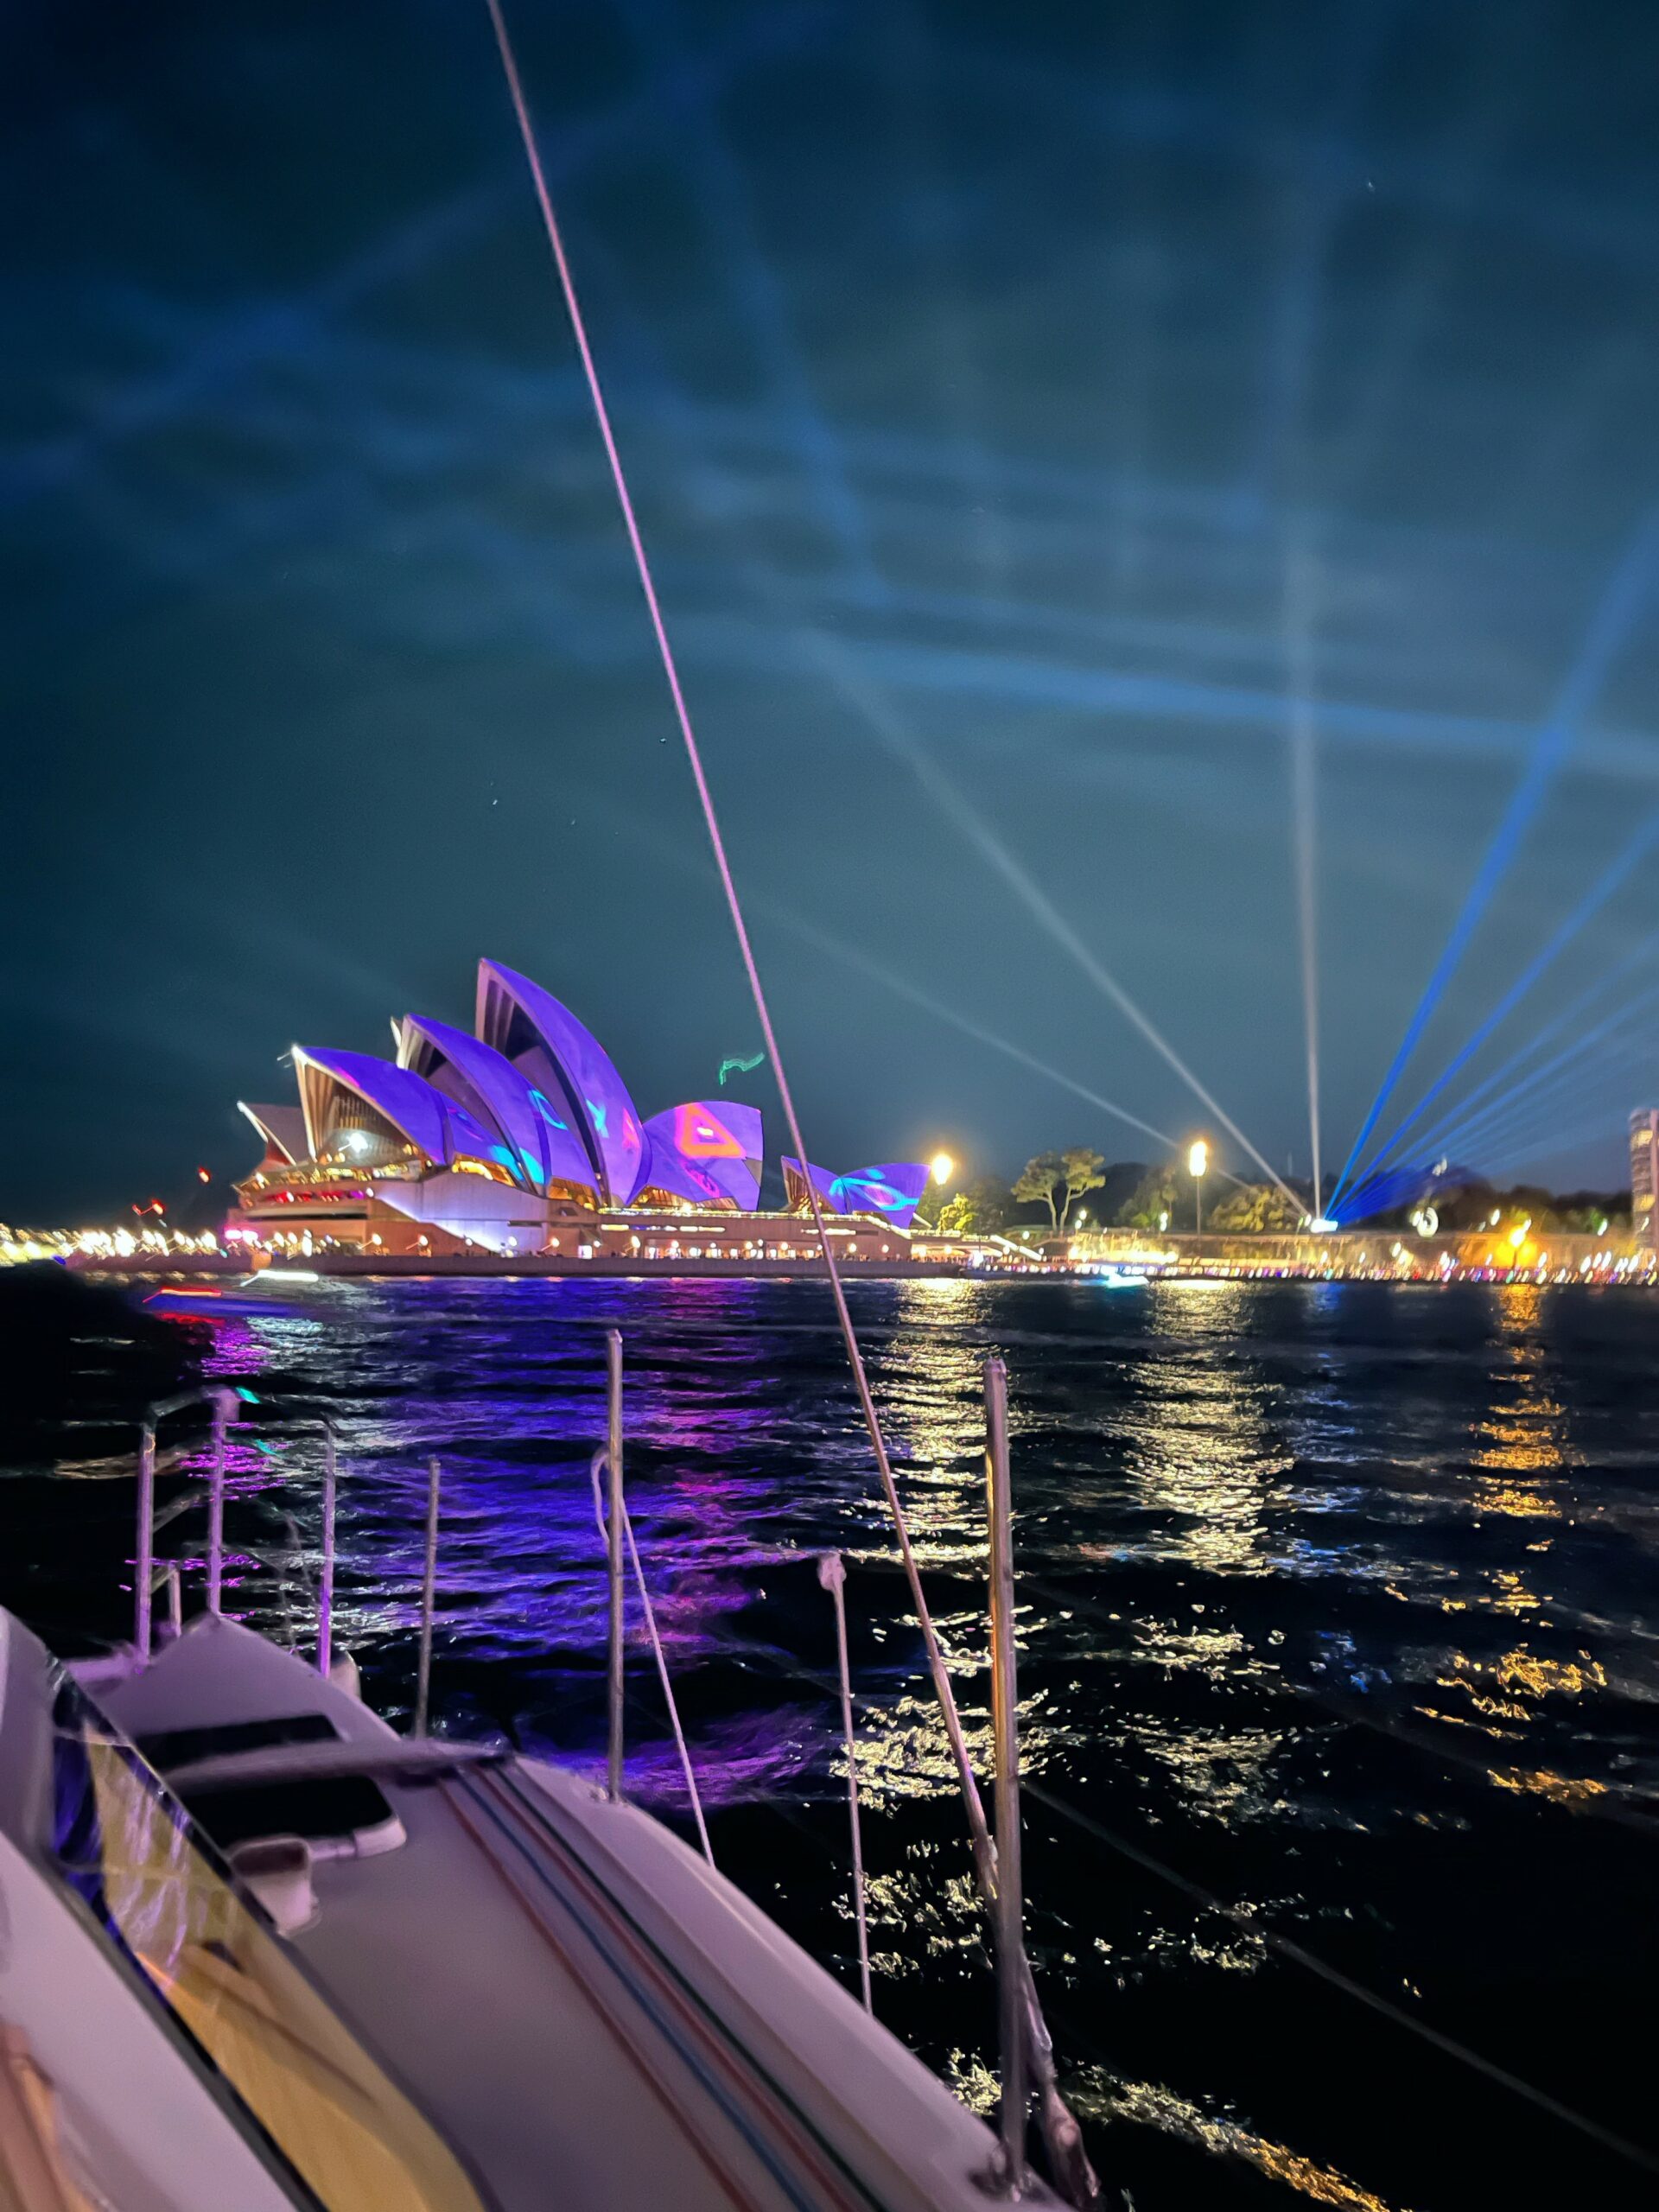 Mid-Week 2hr Vivid Sydney Harbour Cruise with complimentary cheese and chocolate platter